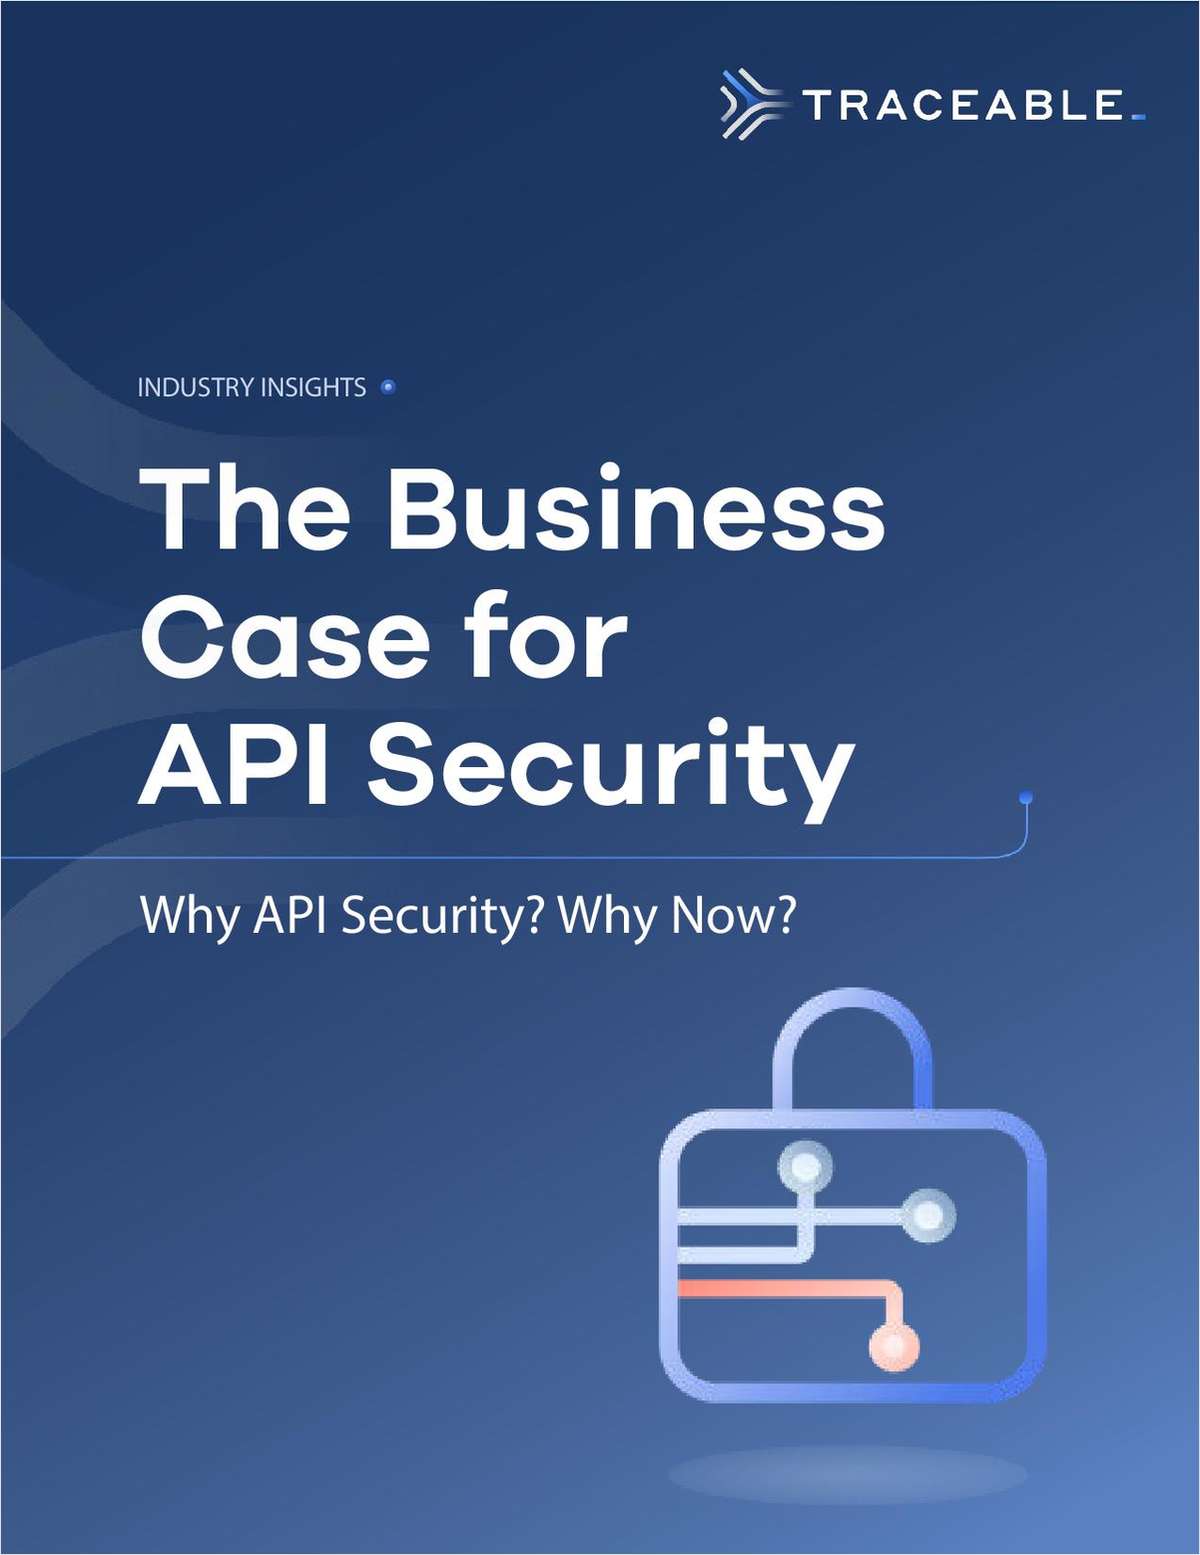 The Business Case for API Security